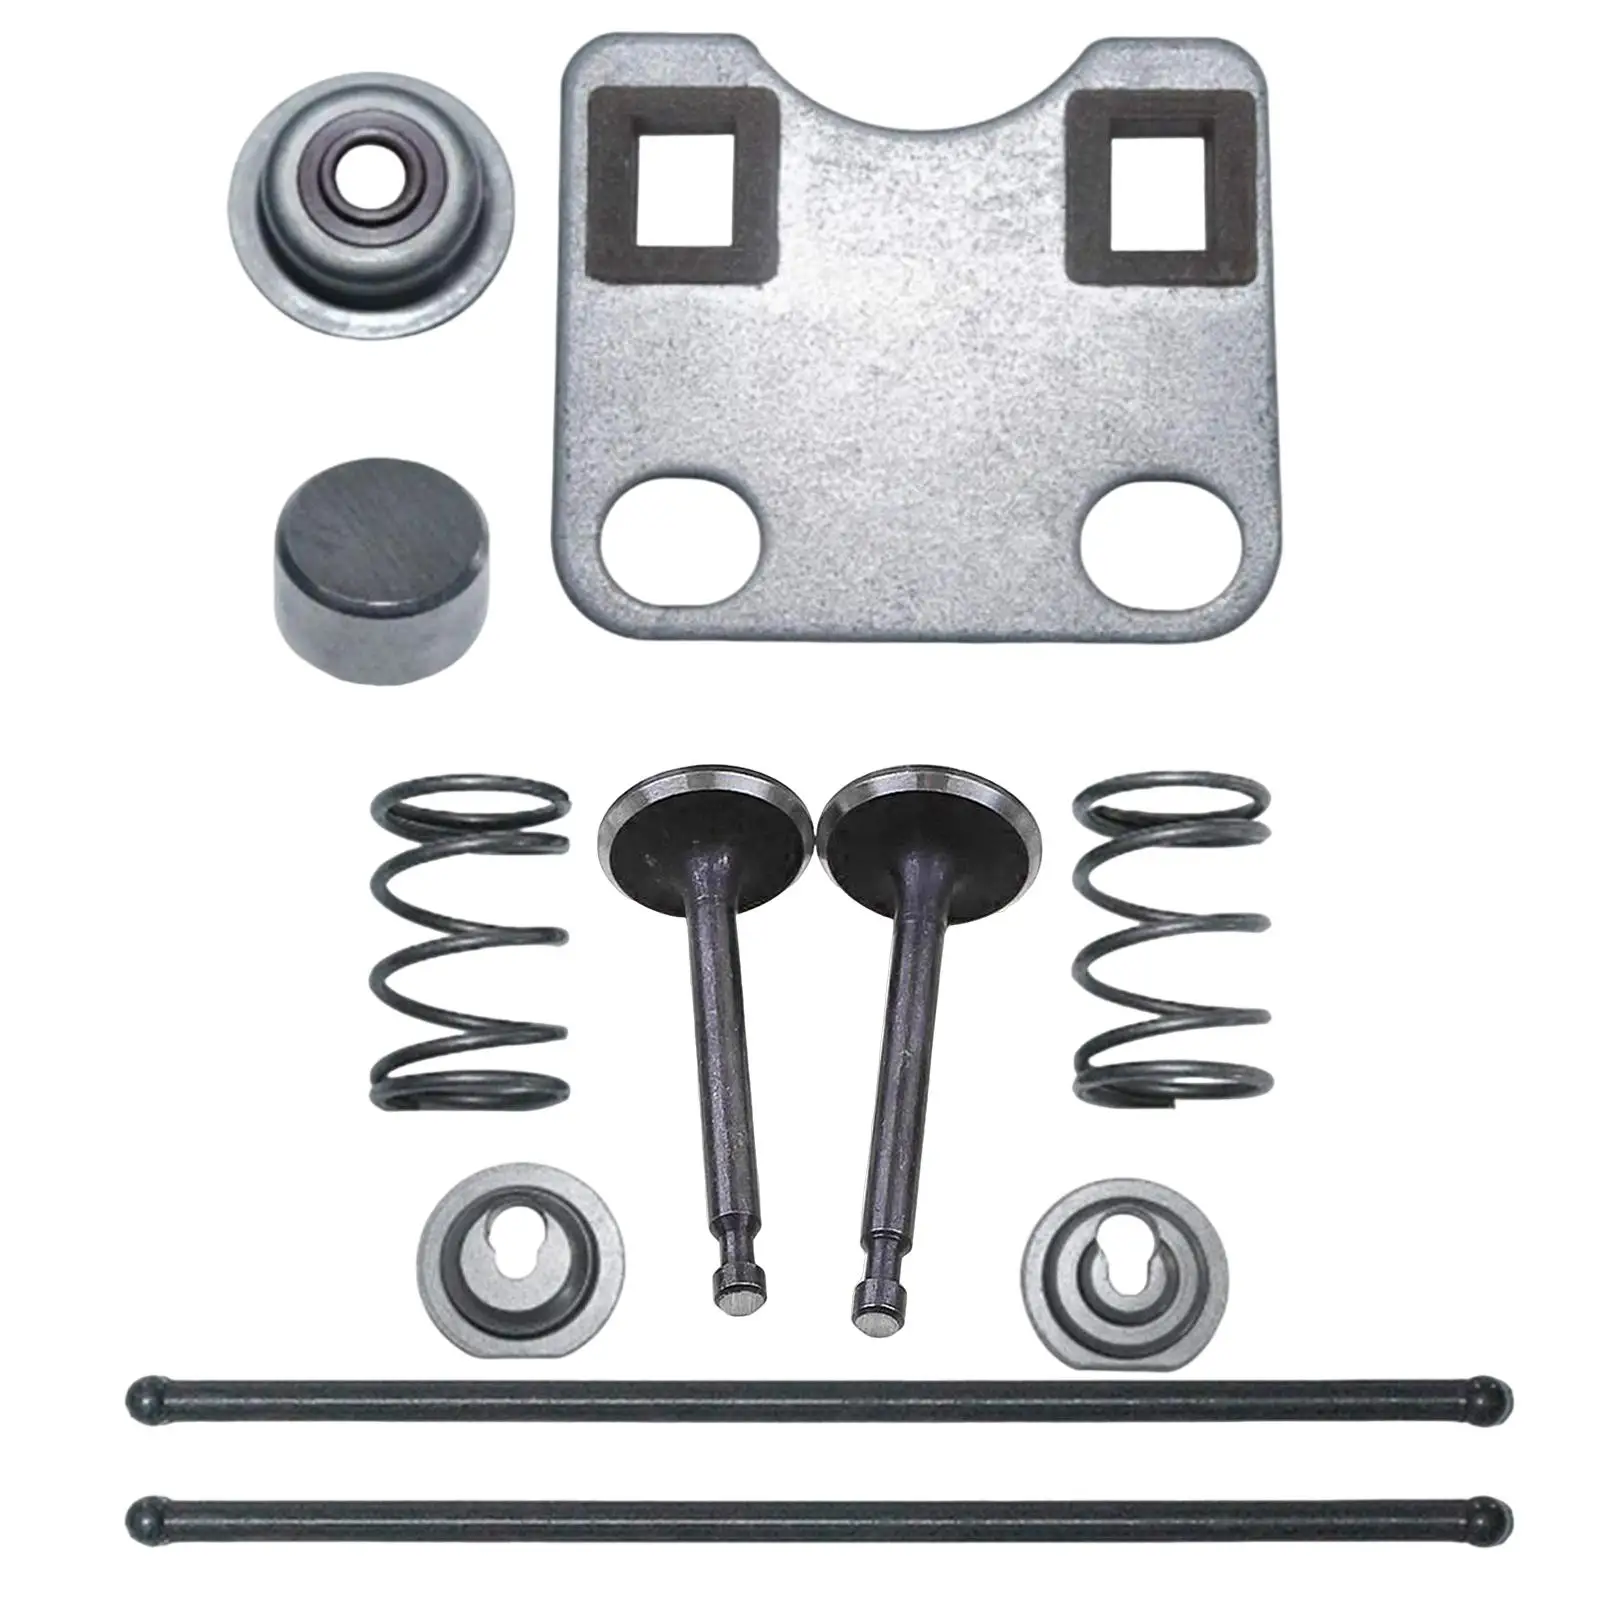 11Pcs Engine Intake Exhaust Valve Kit 5.5HP 6.5HP Chainsaw Accessories 14791-Ze1-010 Guide Plate Parts for Honda Gx160 Gx200